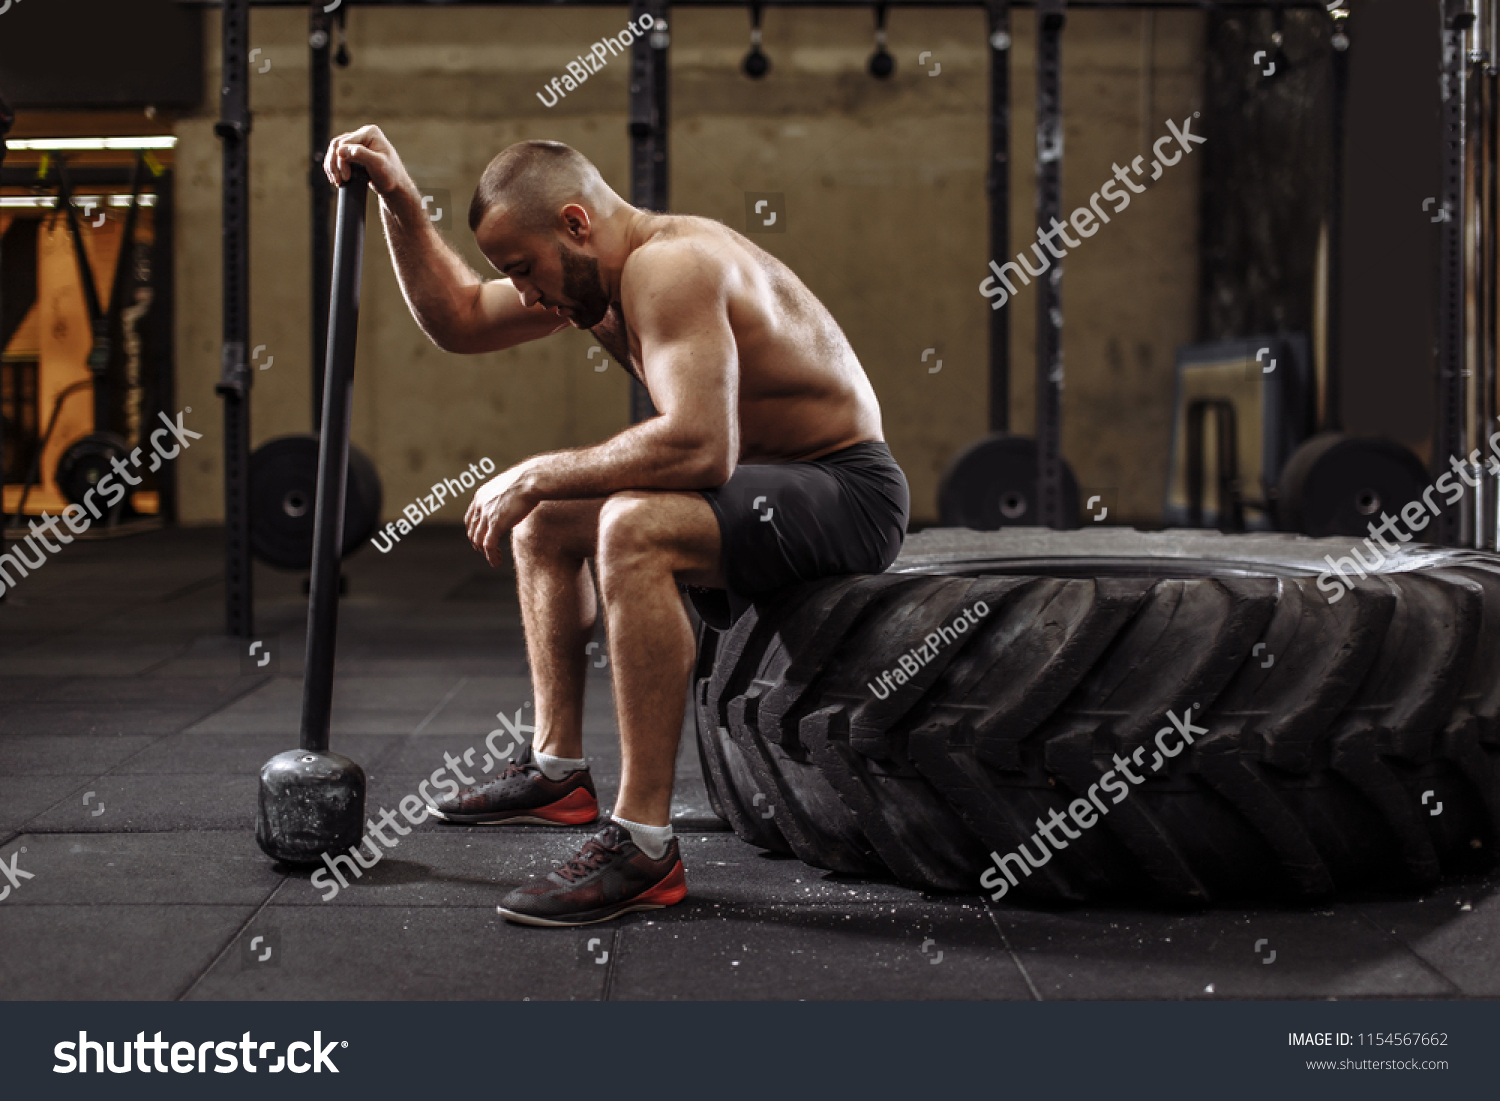 handsome bodybuilder with closed eyes is resting after doing sledgehammer exercises at the gym. full length side view photo #1154567662